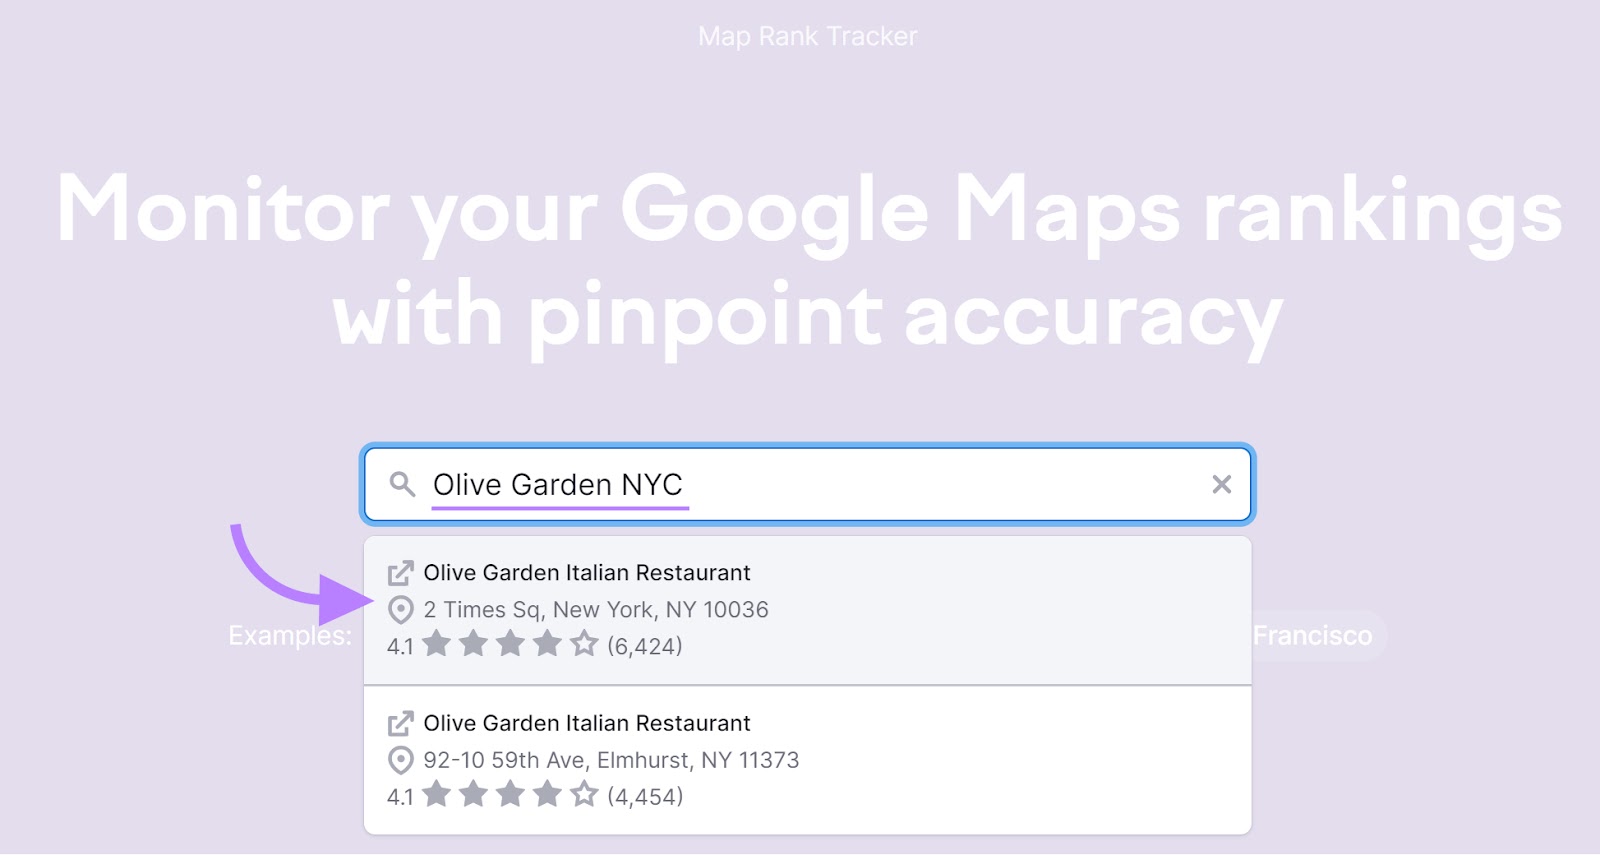 Map Rank Tracker tool with "Olive Garden NYC" in the search field.